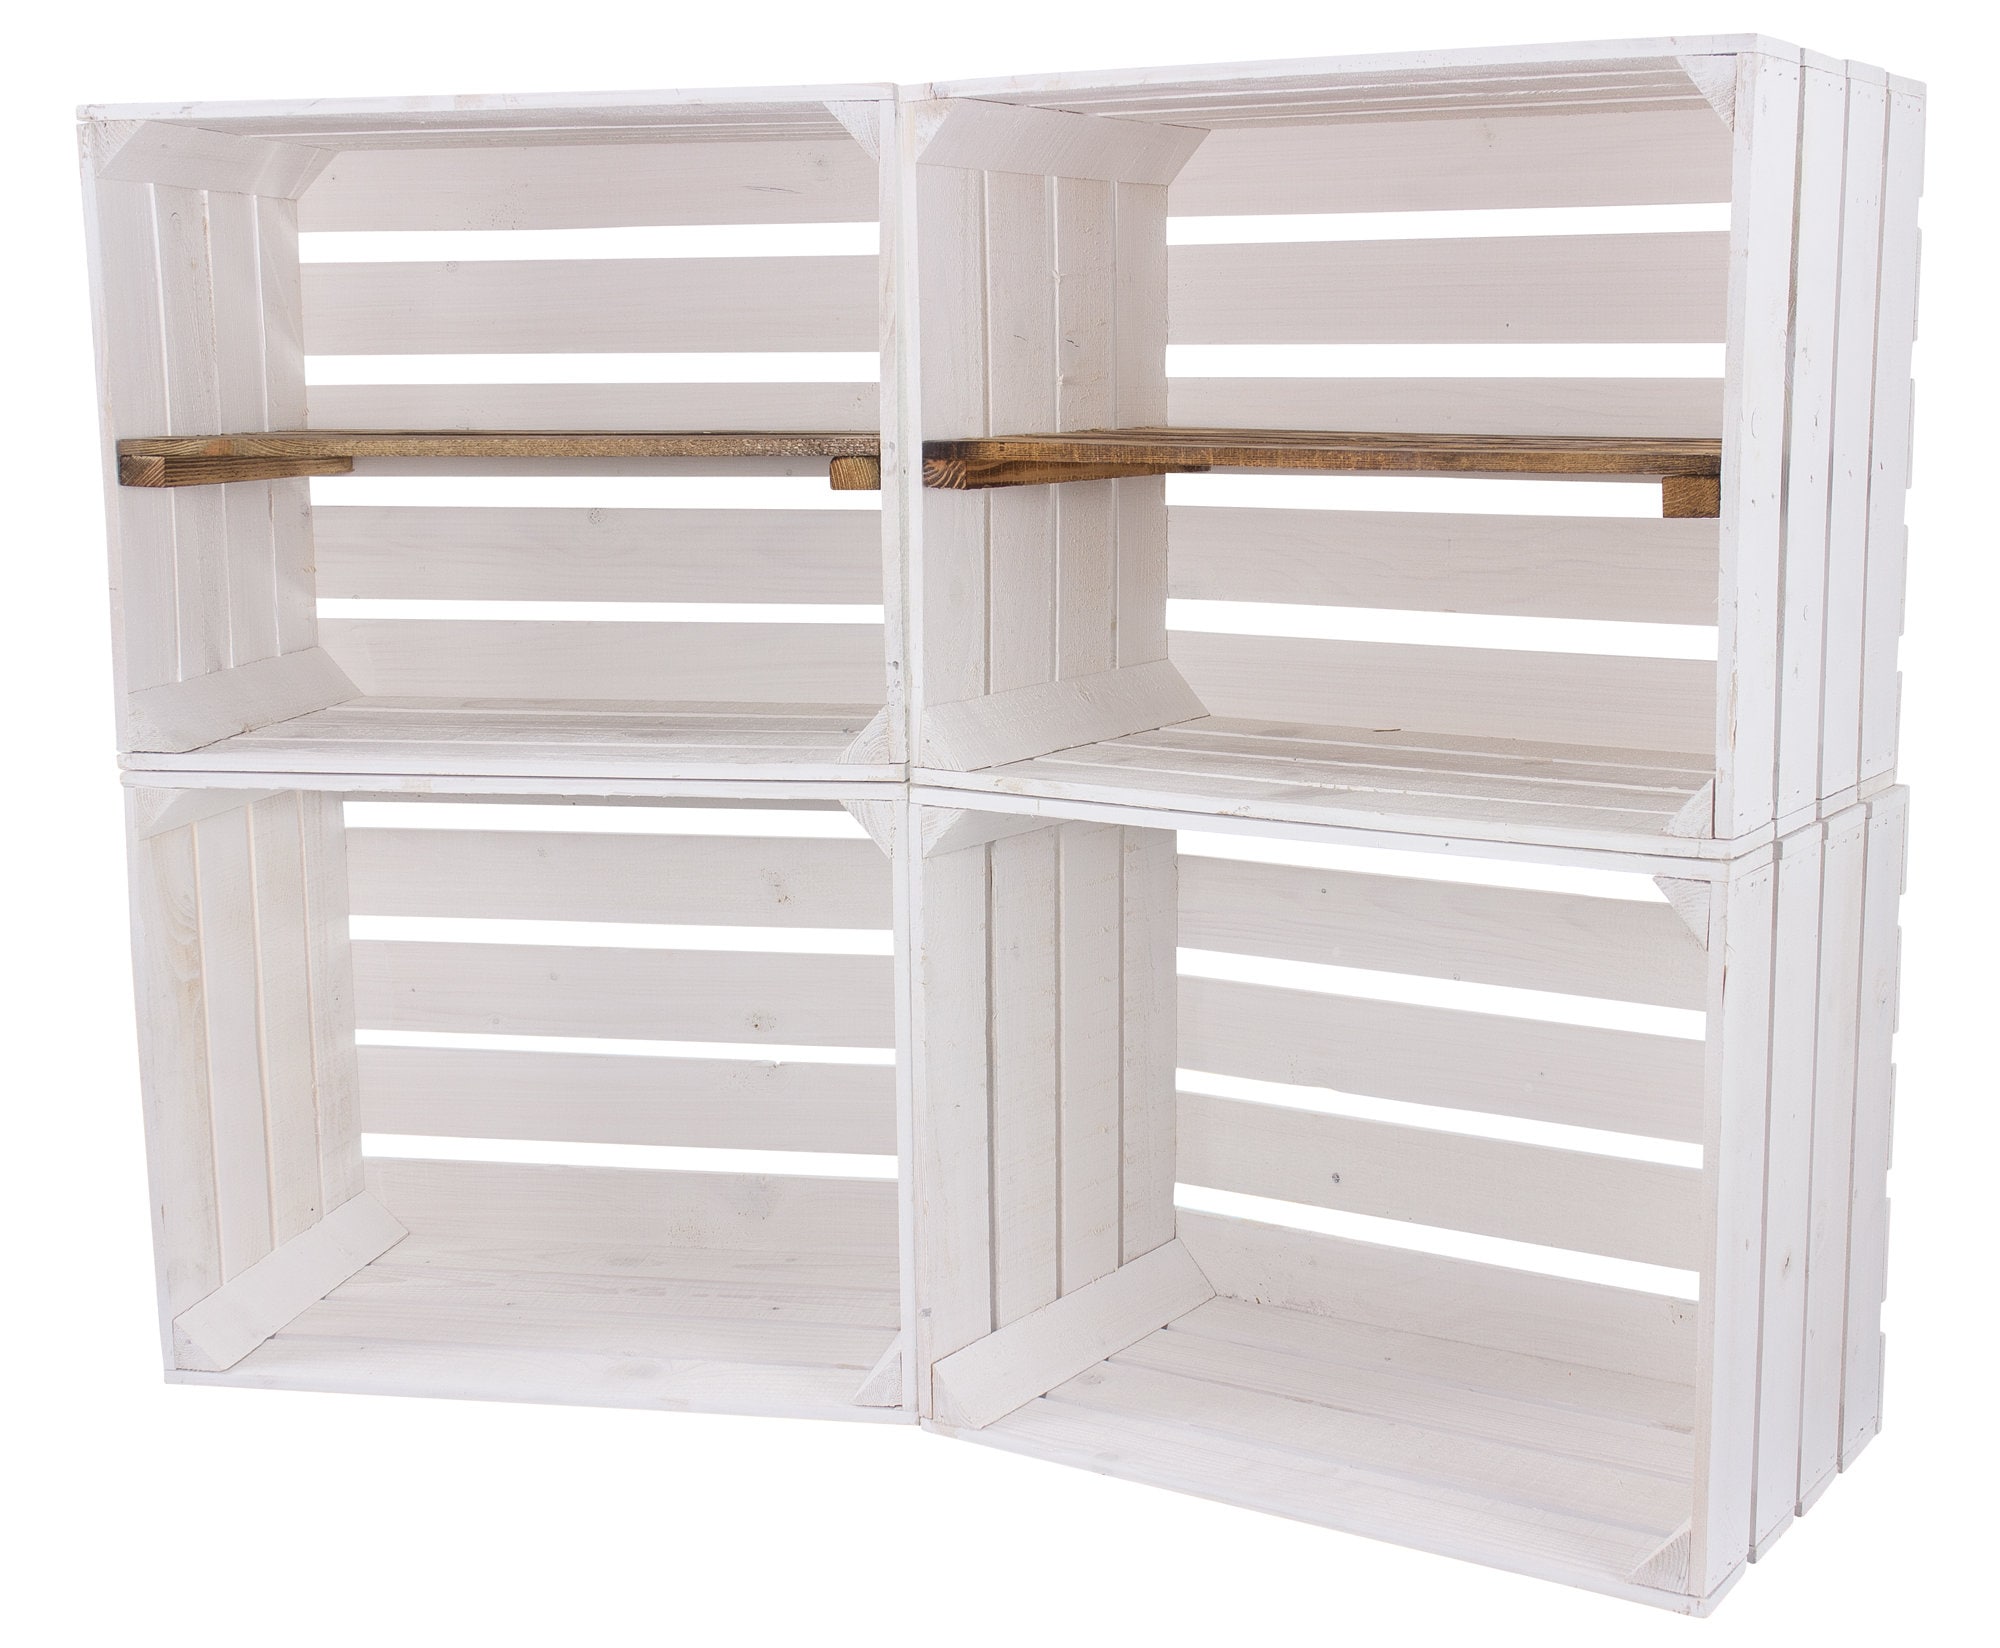 Graduated Prices L New White Wooden Box With Flamed Middle Board  50cmx40cmx30cm Shoe Rack Wall Shelves Wooden Boxes Fruit Boxes Wine Box 